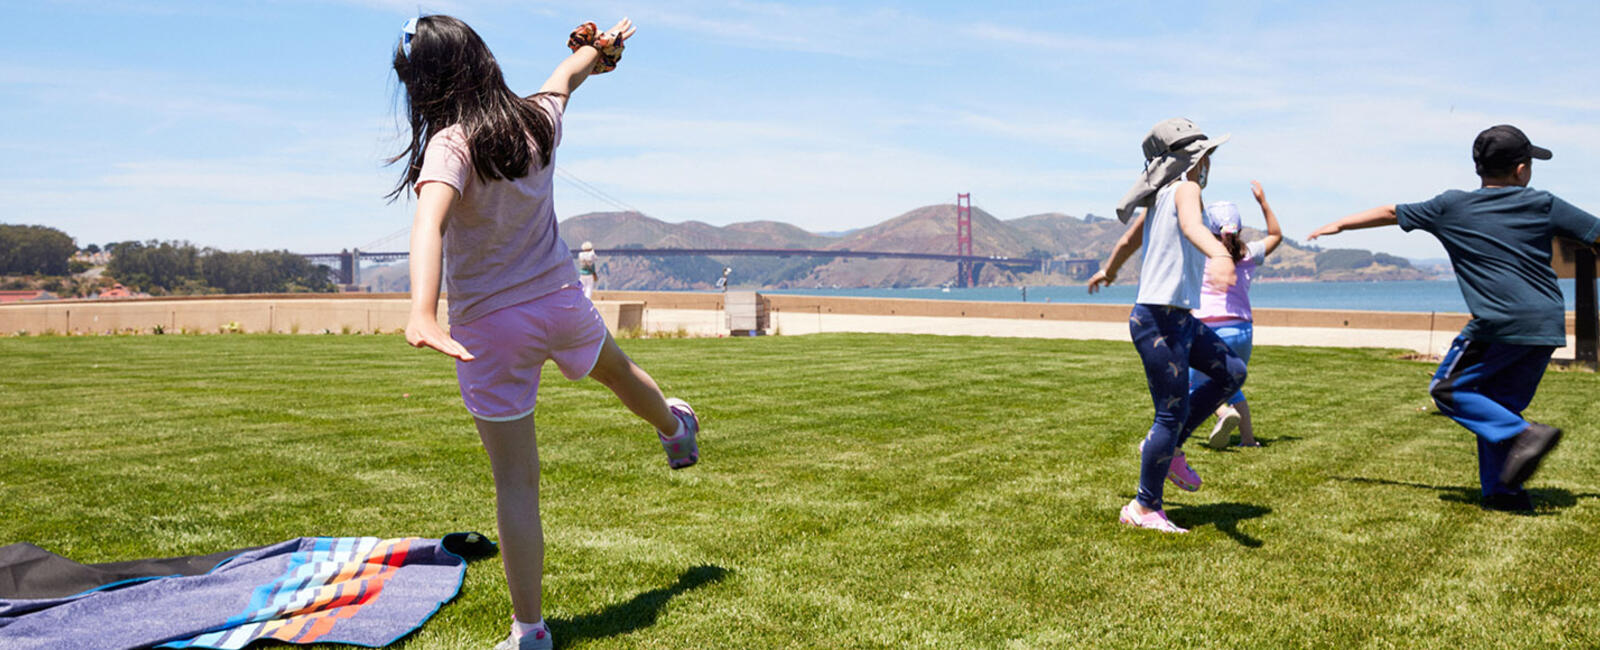 Children playing on lawn at Presidio Tunnel Tops